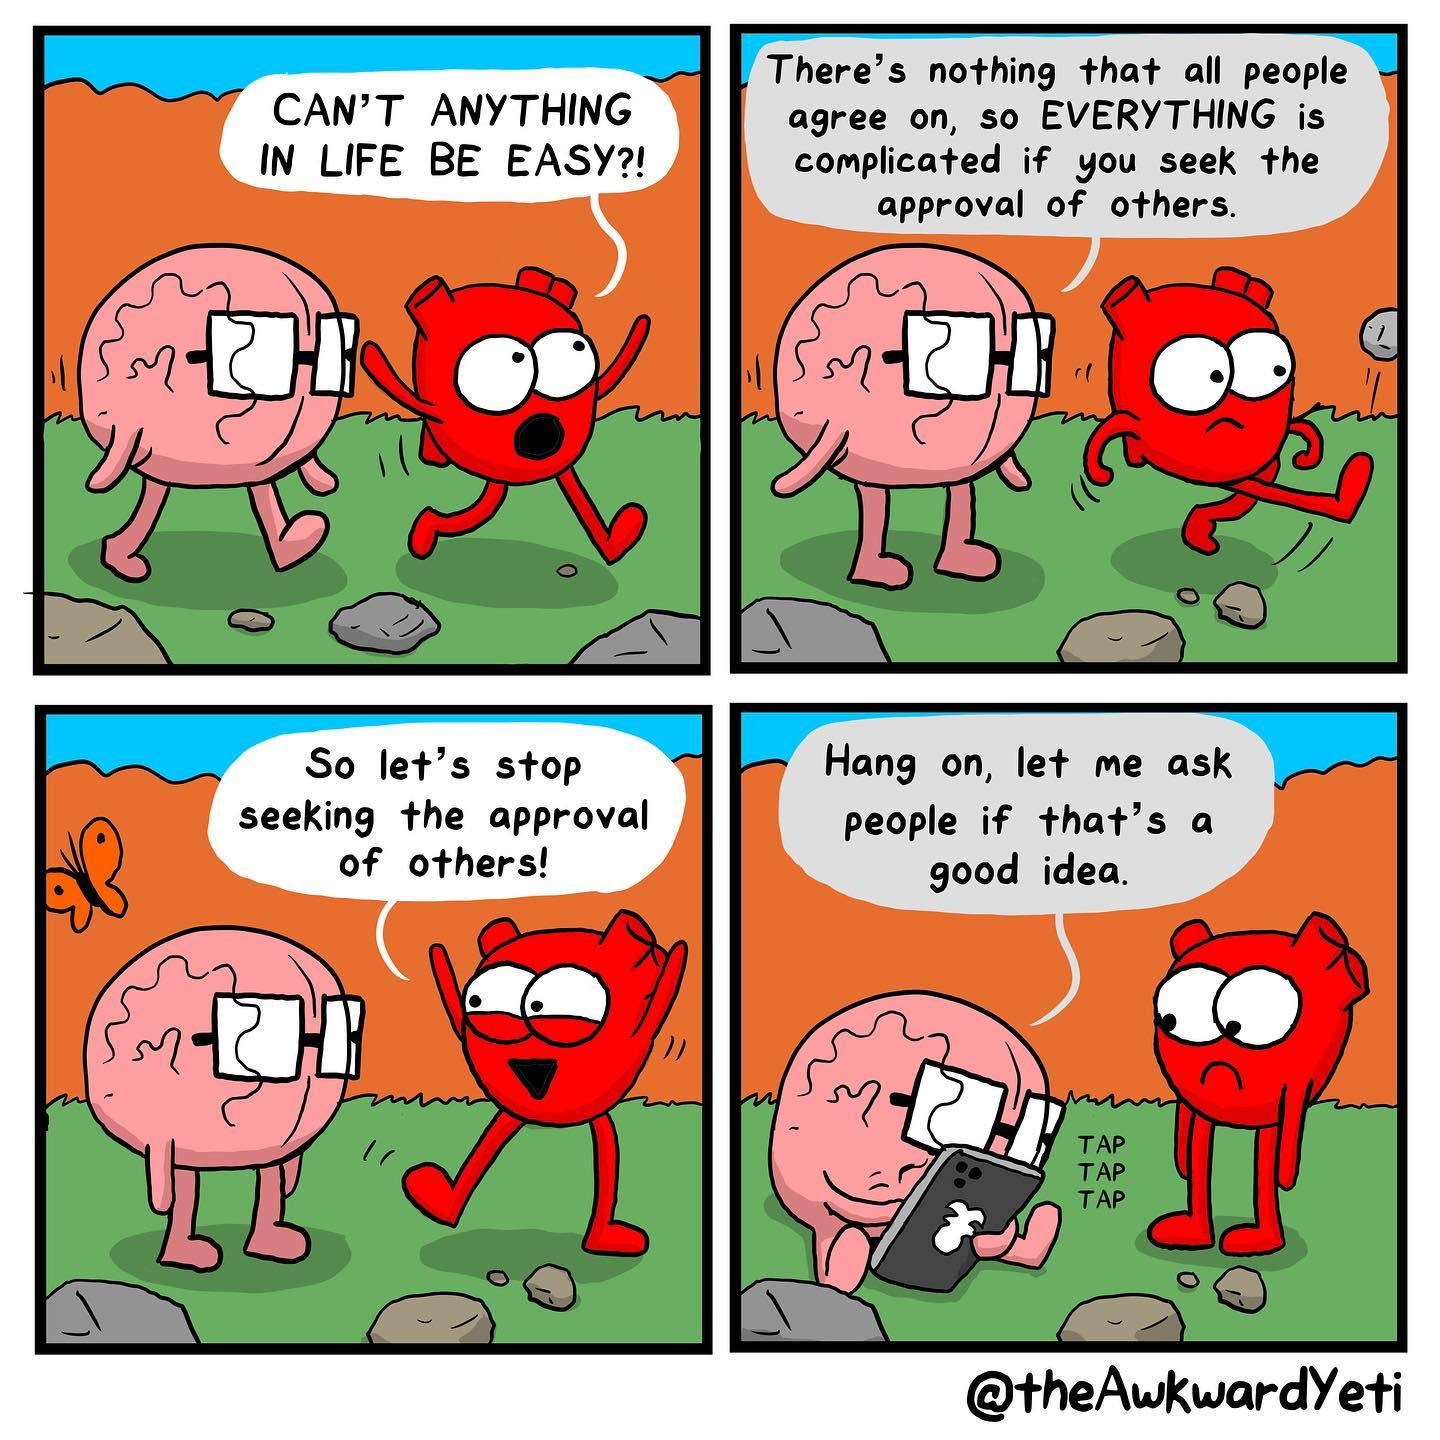 May be a cartoon of text that says 'CAN'T ANYTHING IN LIFE BE EASY?! There's nothing that all people agree on, so EVERYTHING is complicated if you seek the approval of others. So let's stop seeking the approval of others! Hang on, let me ask people if that's a good idea. TAP TAP TAP @theAwkwardYeti'